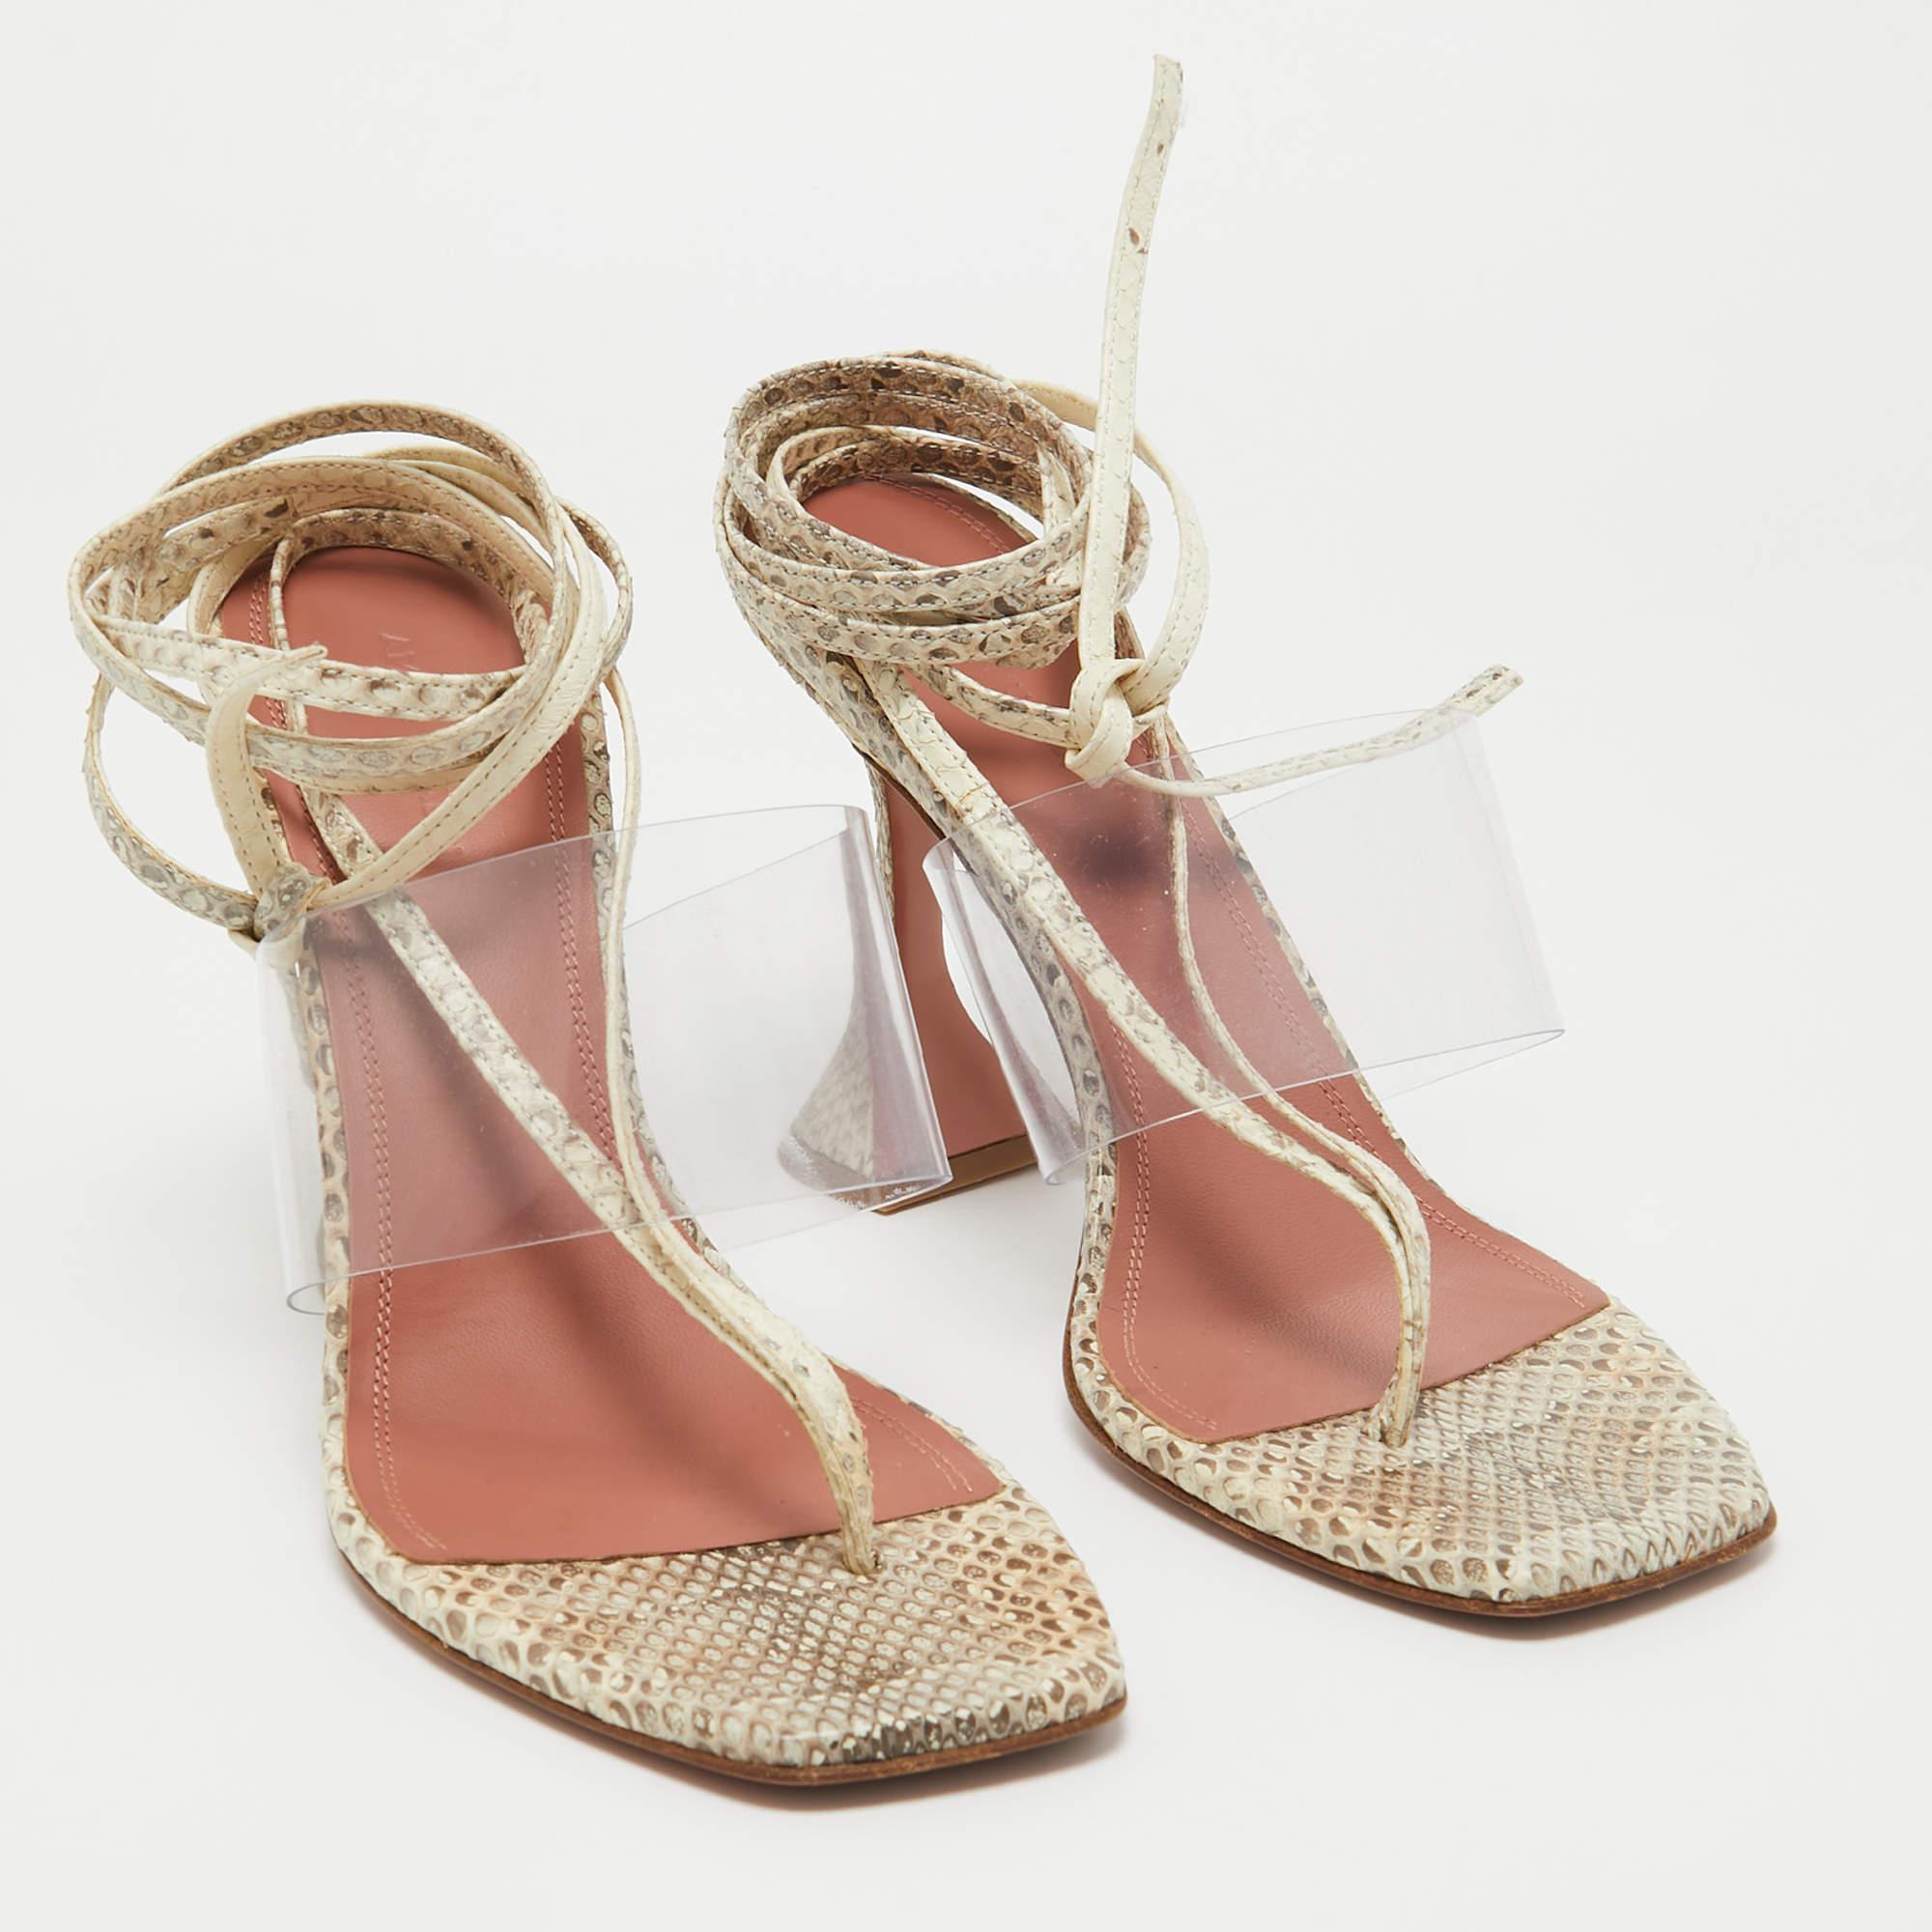 Amina Muaddi Brown/Beige Embossed Snakeskin and PVC Zula Sandals Size 40 For Sale 1